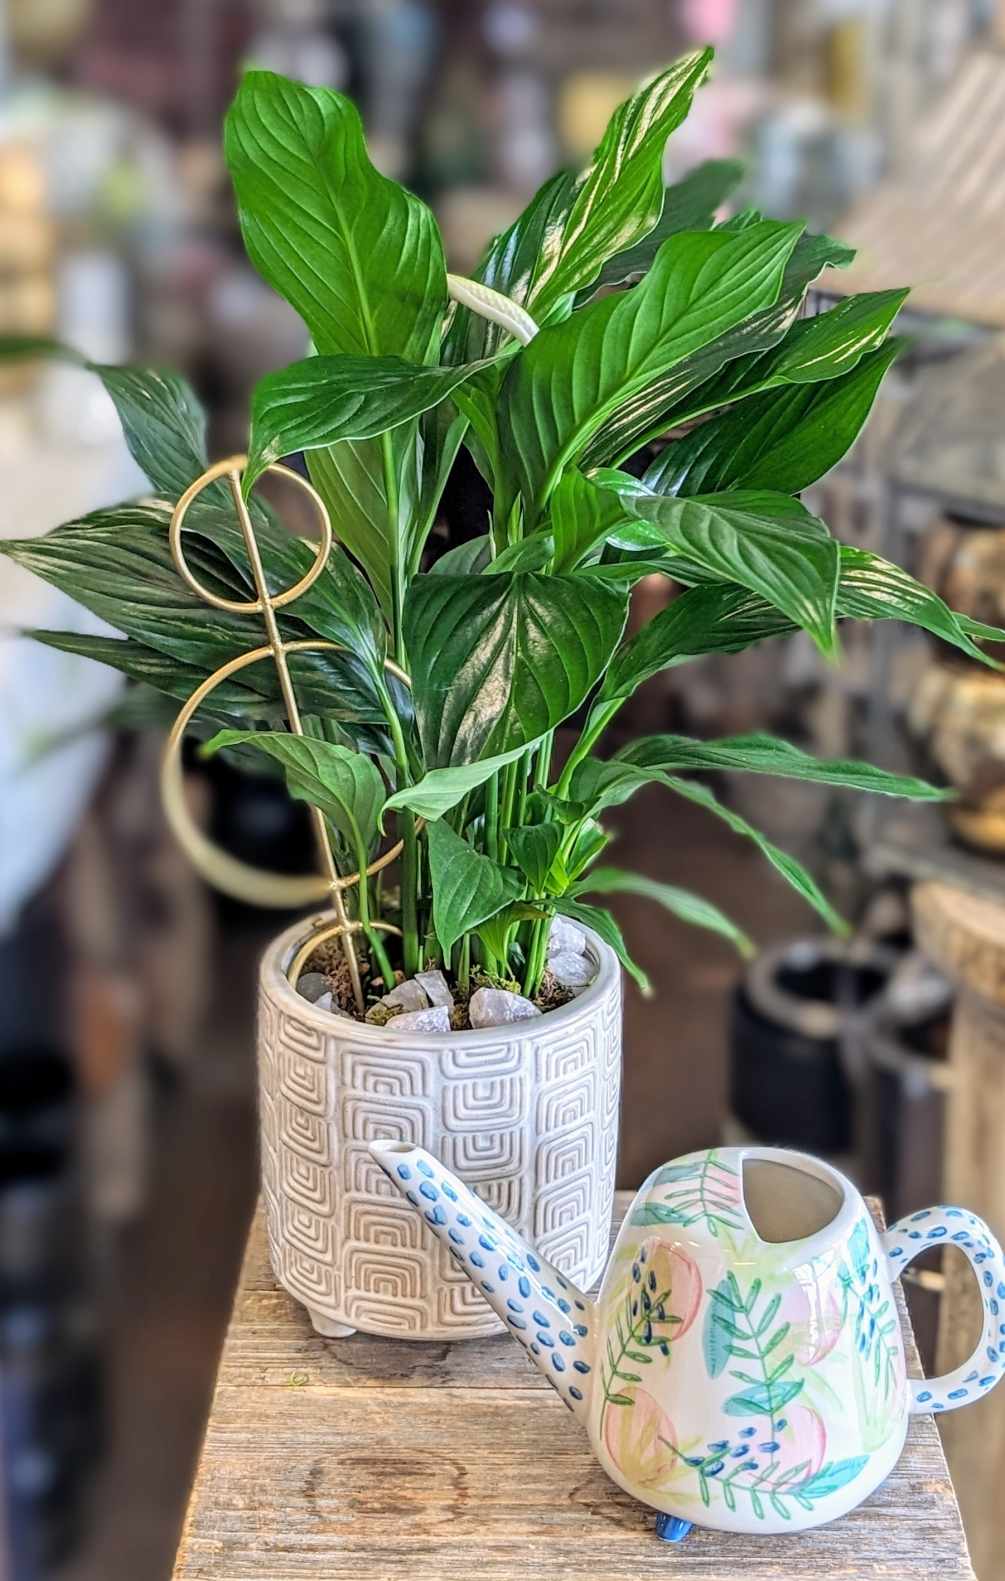 A sweet gift for your favorite plant lover. A peace lily plant